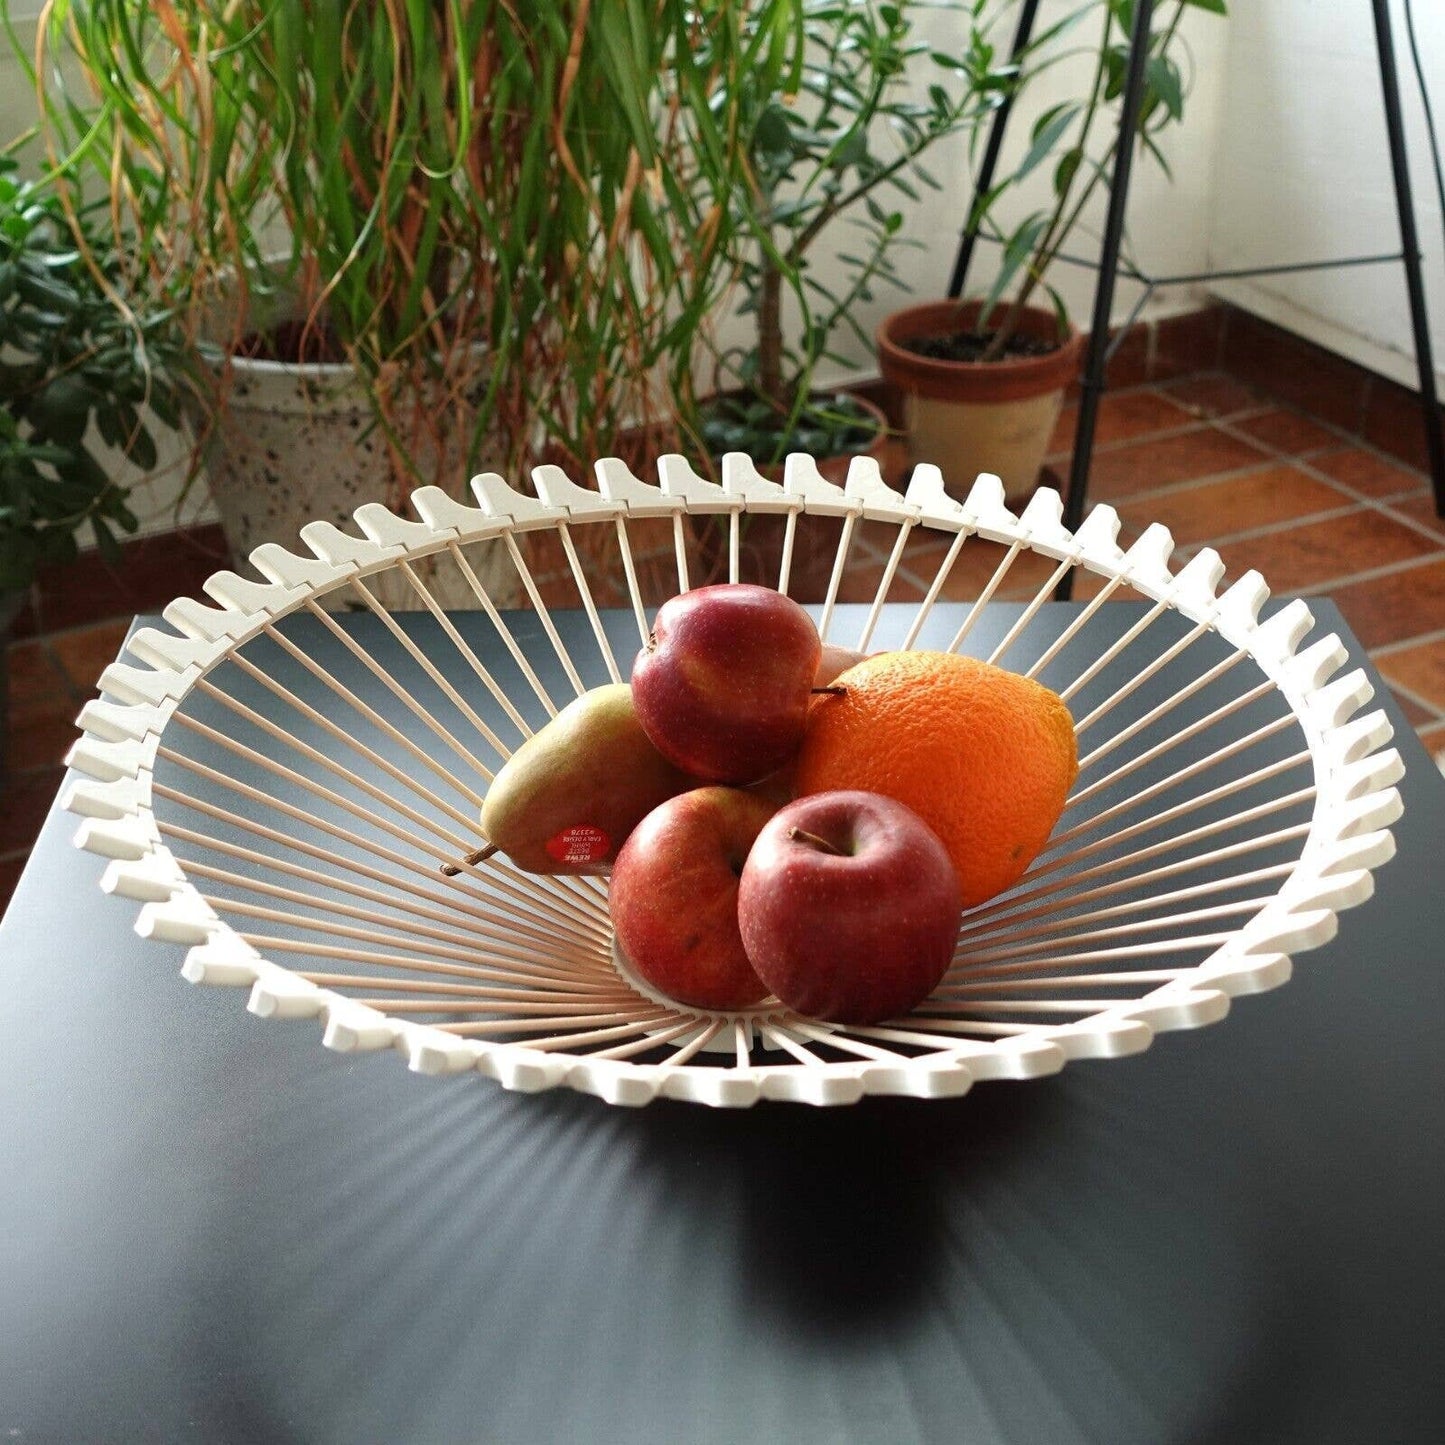 Handcrafted Art Deco Style 3D Printed Bowl | Unique Home Decor Piece with Wooden Skewers, Decoration Wooden Skewer Fruit Bowl Sun